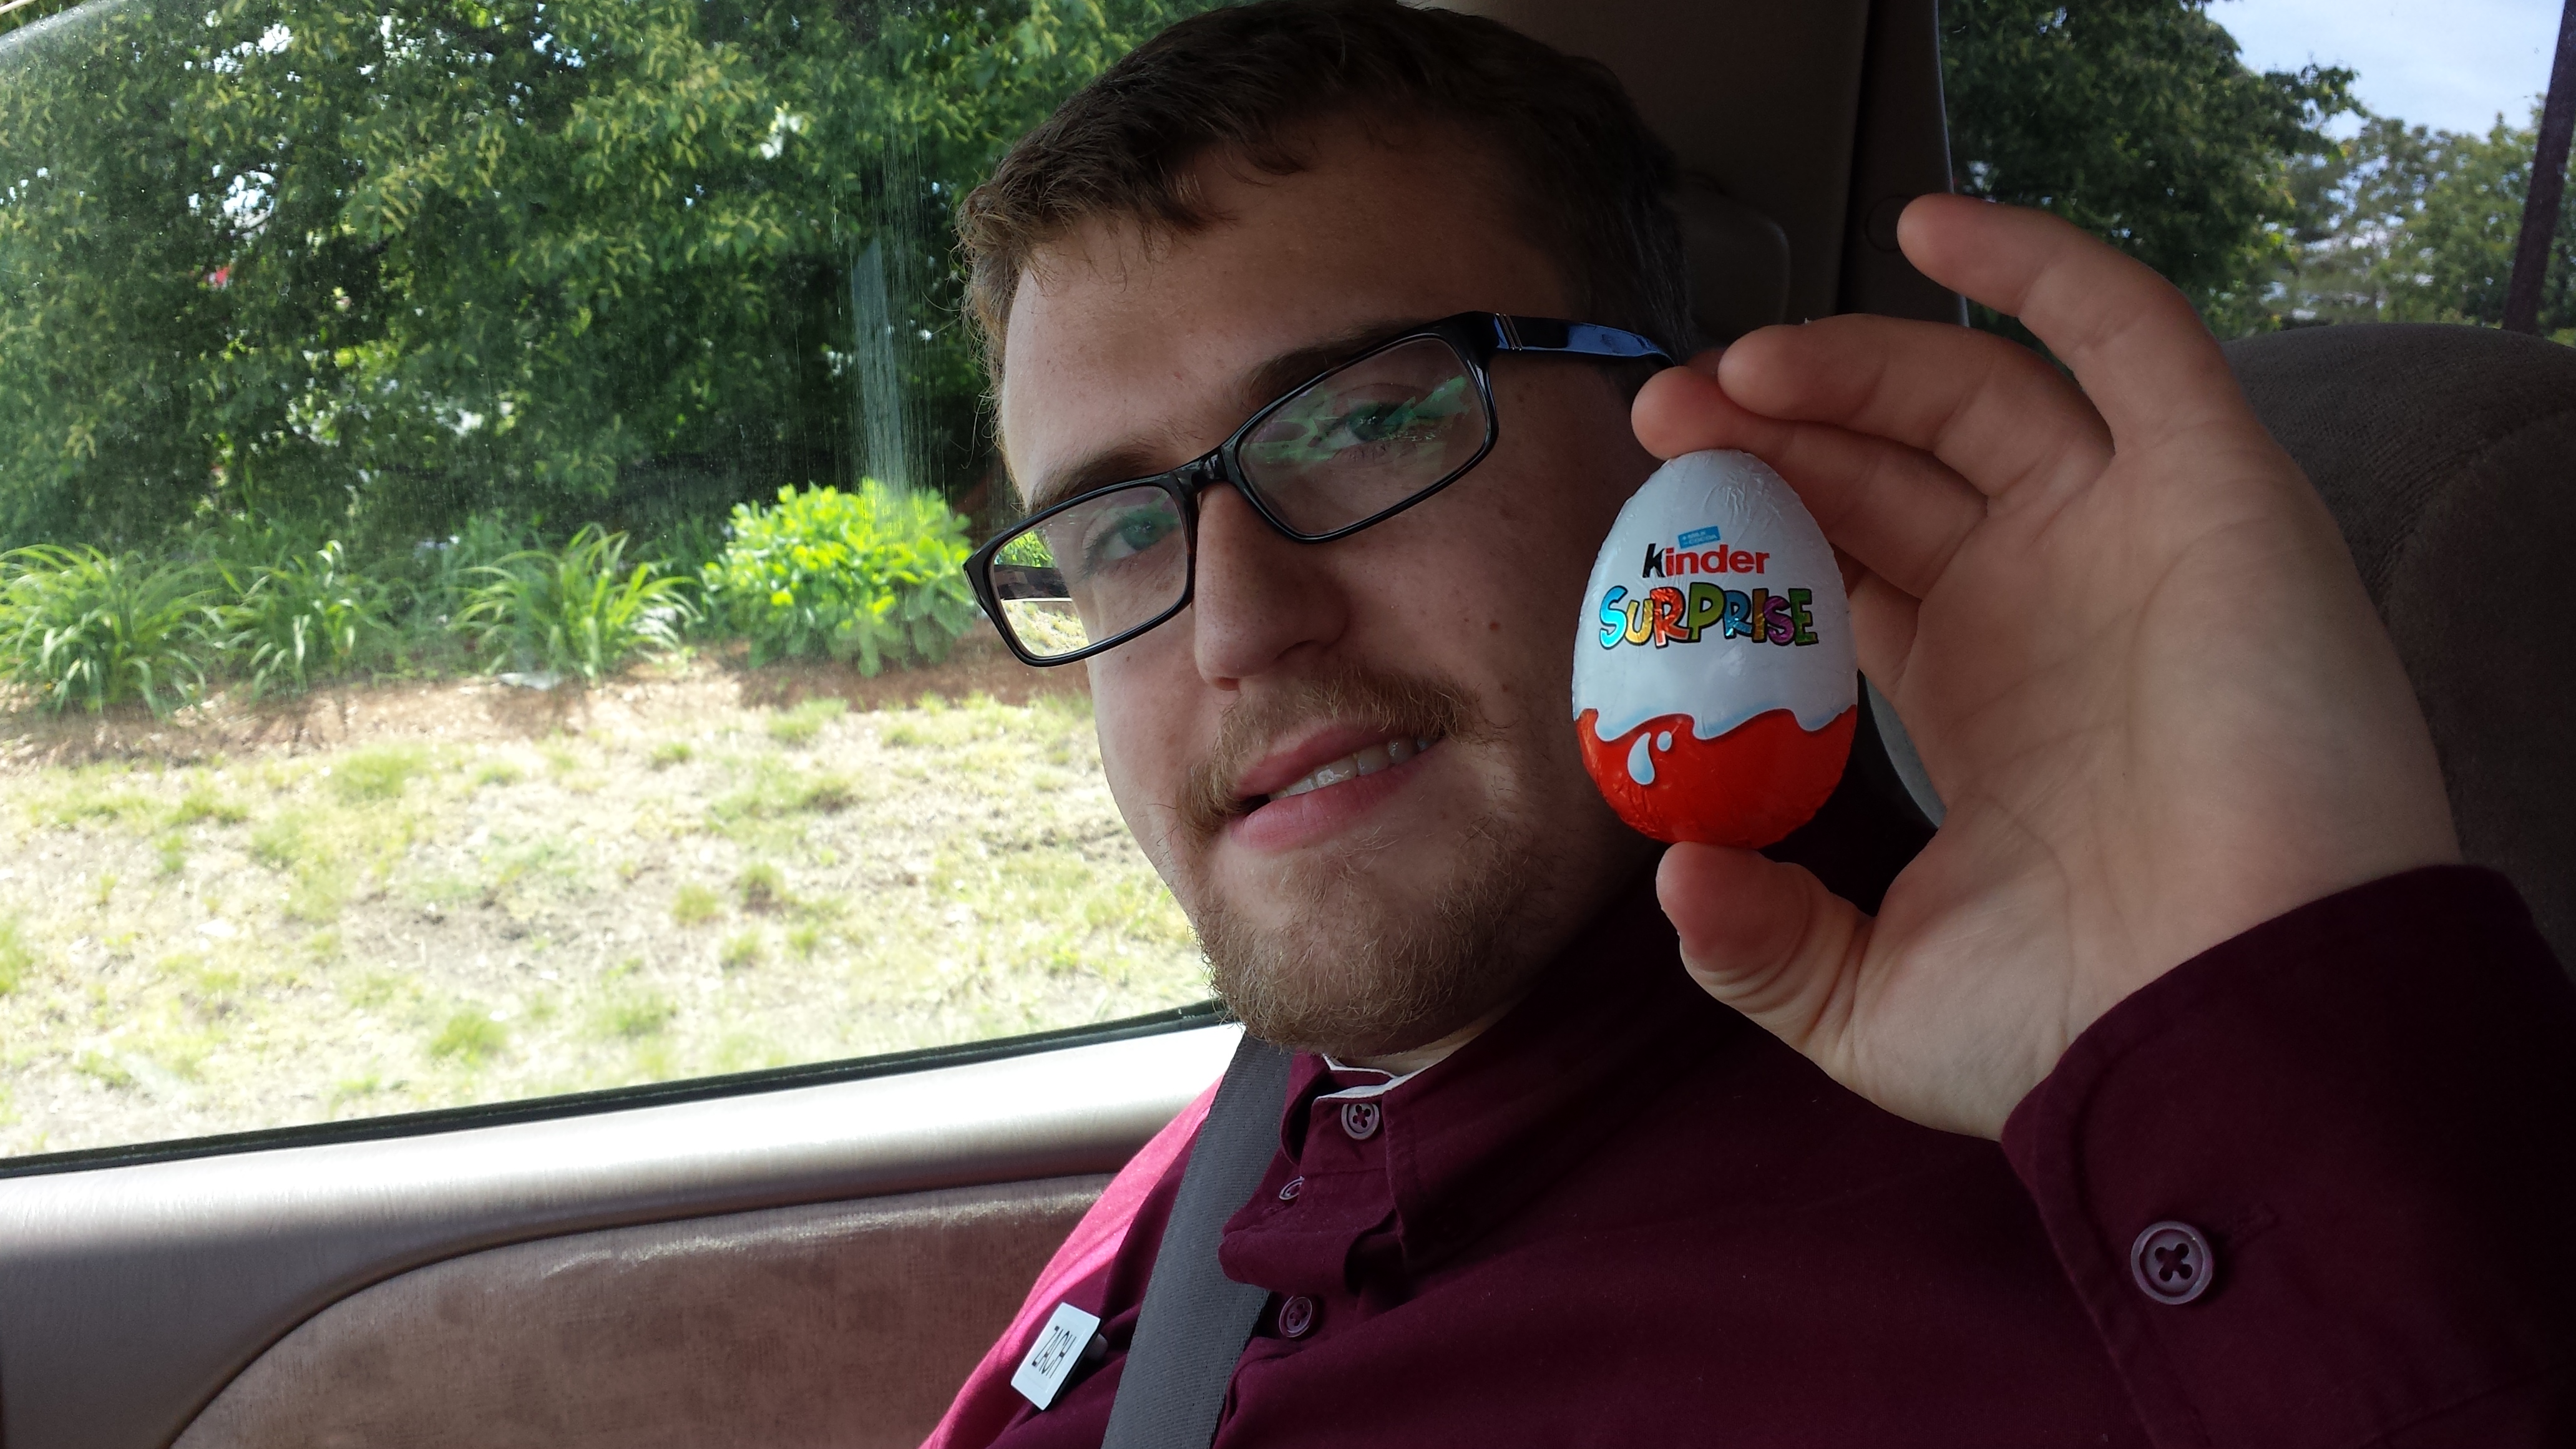 me with a kinder egg from England